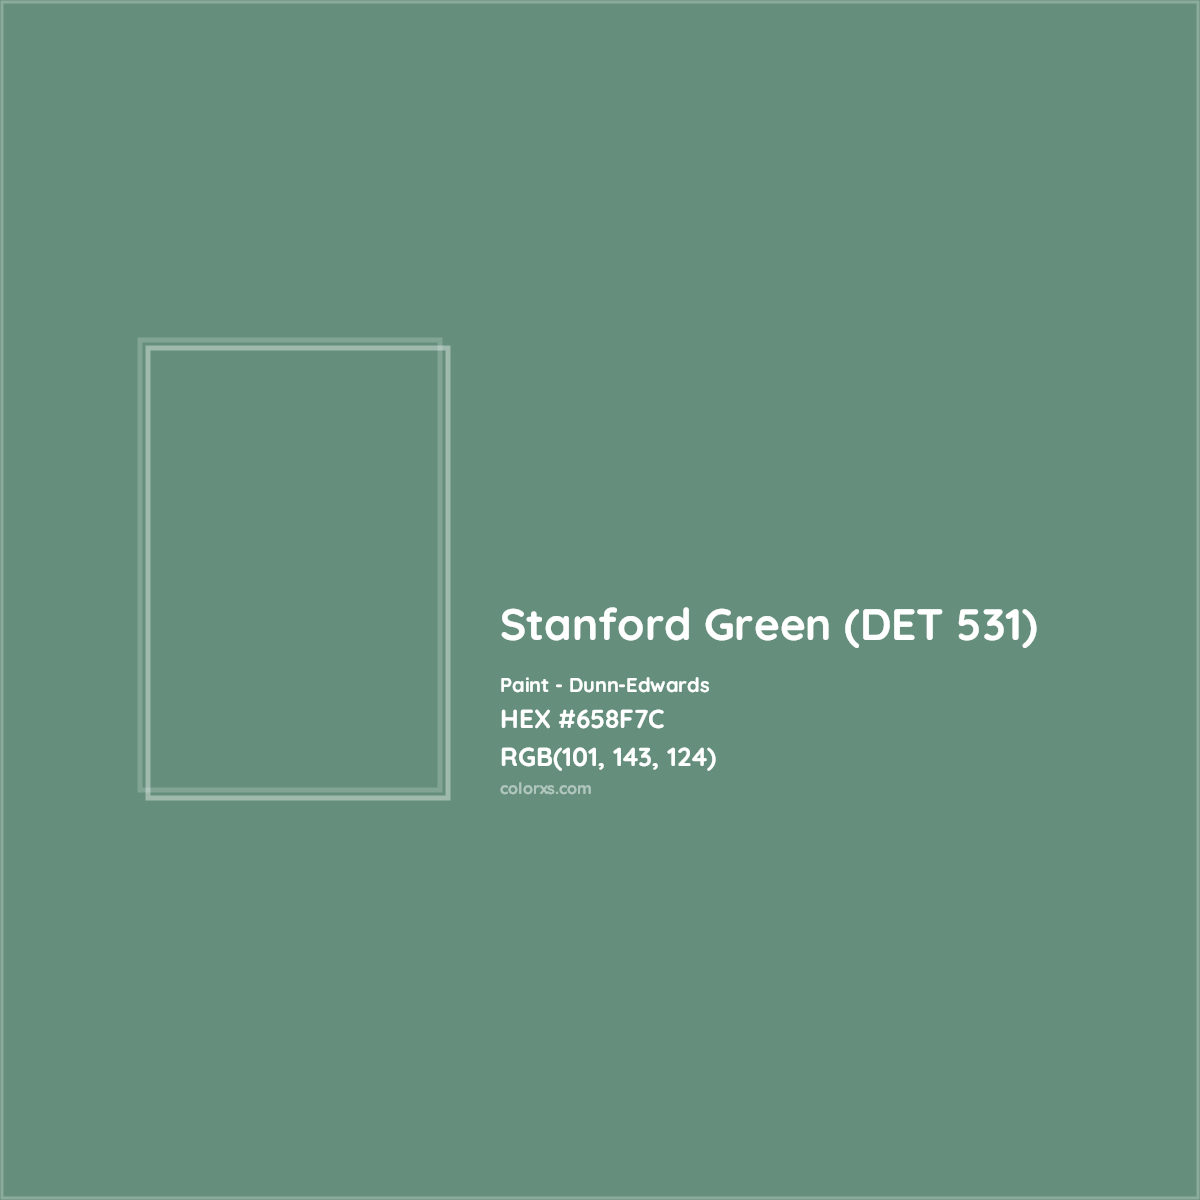 HEX #658F7C Stanford Green (DET 531) Paint Dunn-Edwards - Color Code